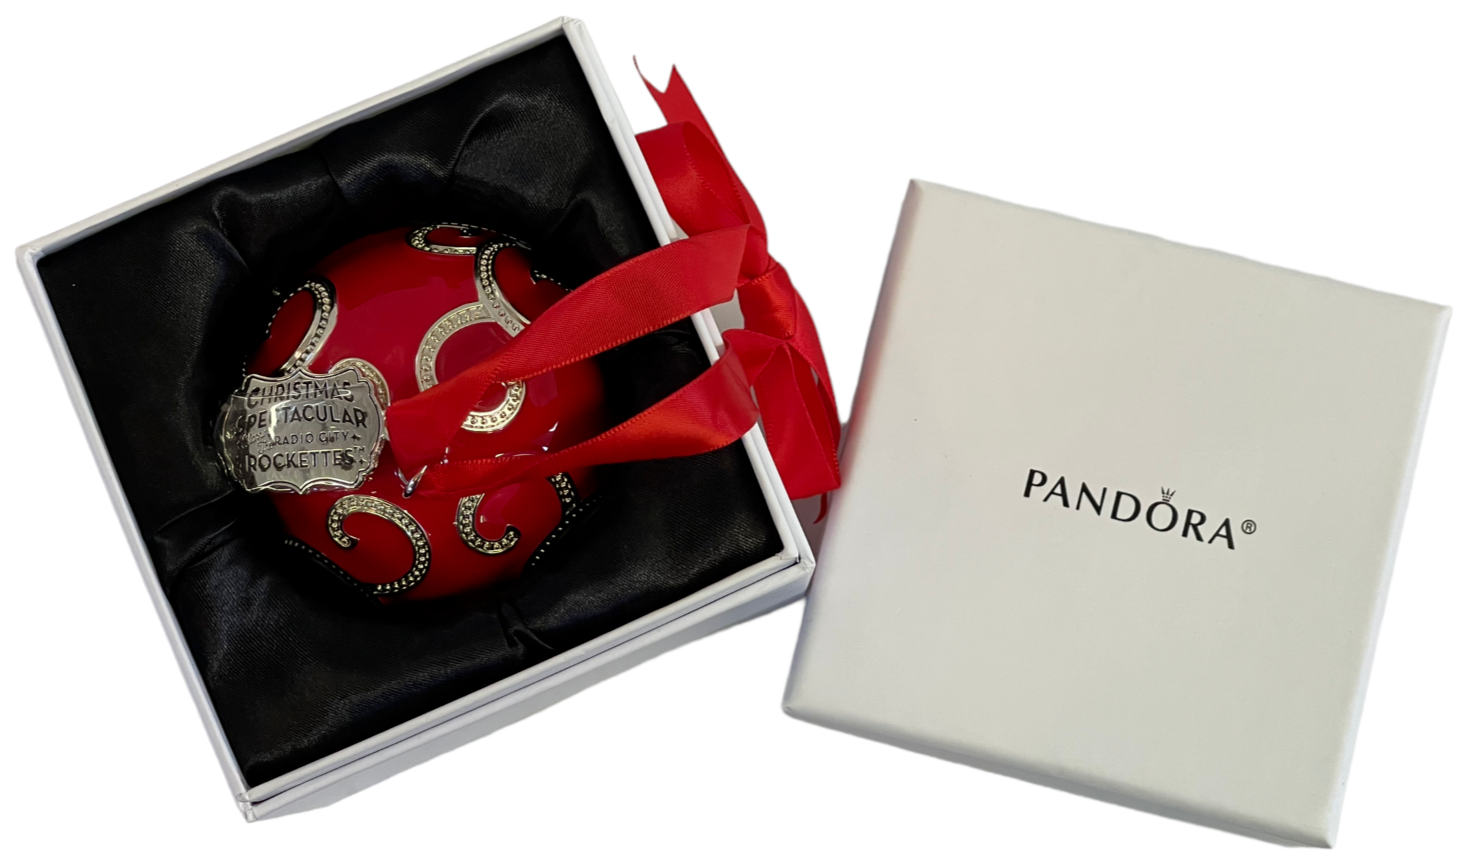 Pandora Red Rockettes Christmas Spectacular Ornament Radio City in Box - $31.49